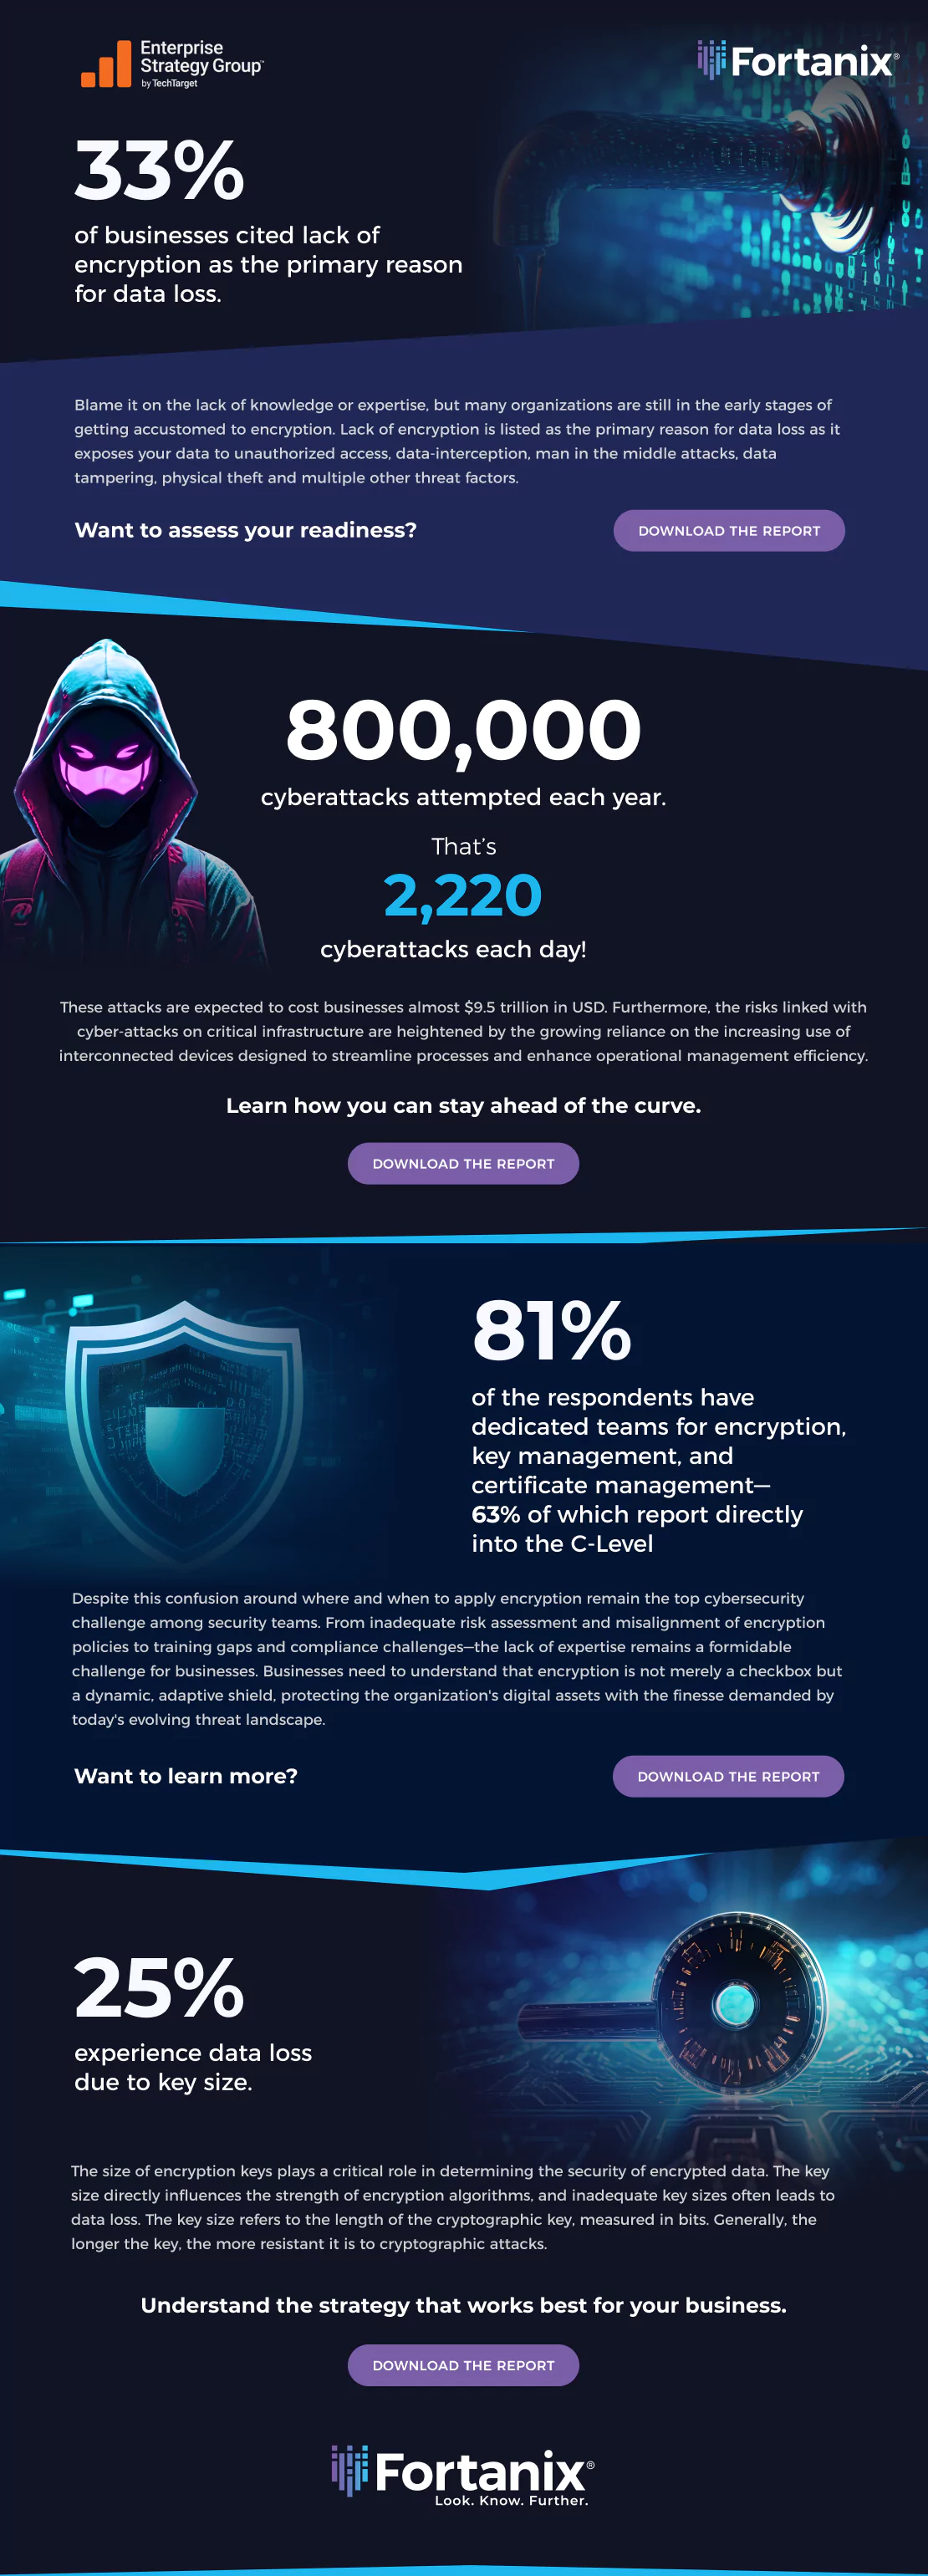 A report on the impact of cyber threats leading to business data loss